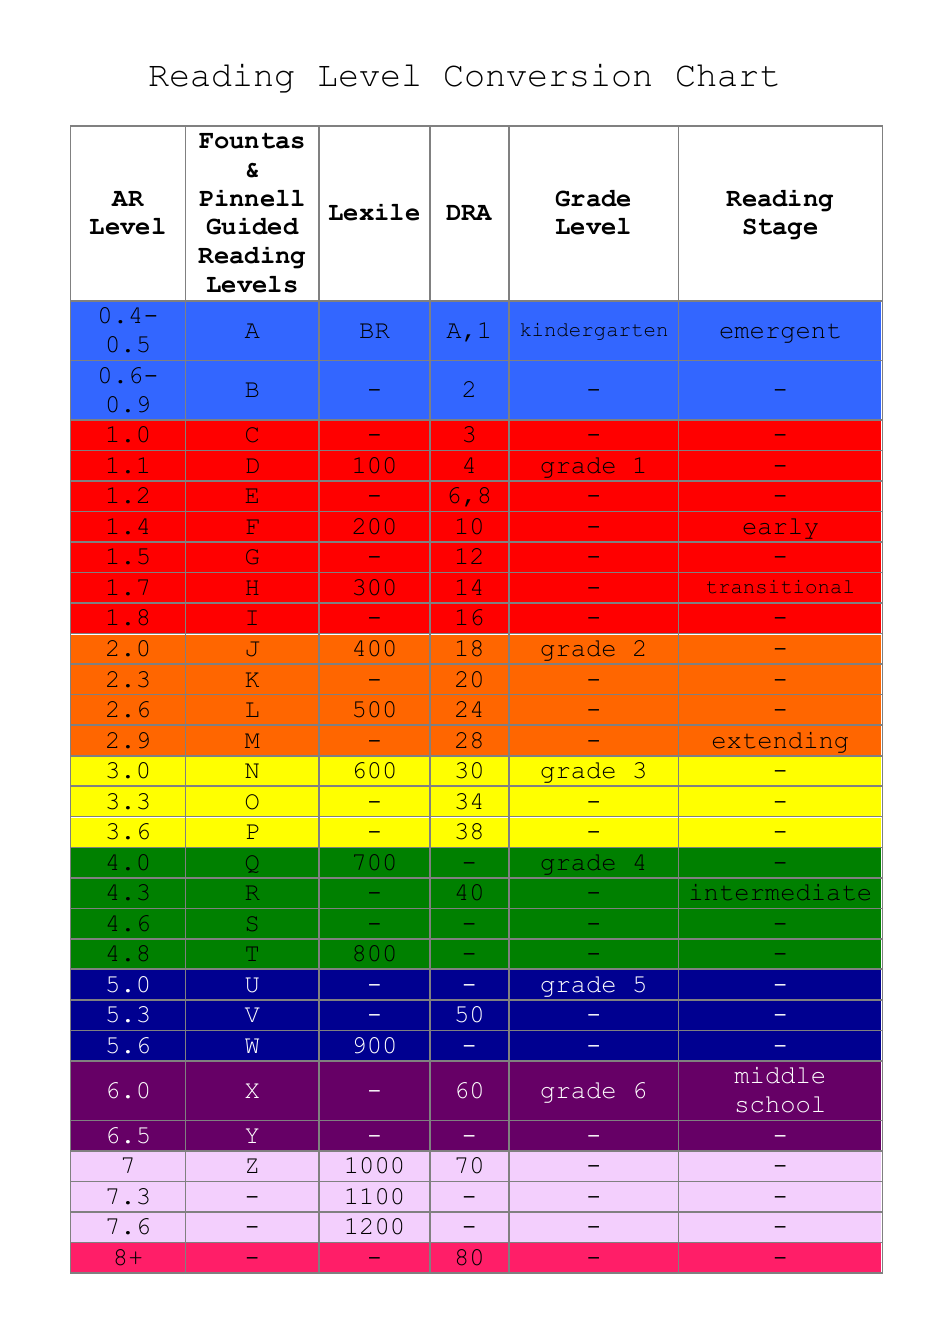 Reading Level Conversion Chart, Page 1